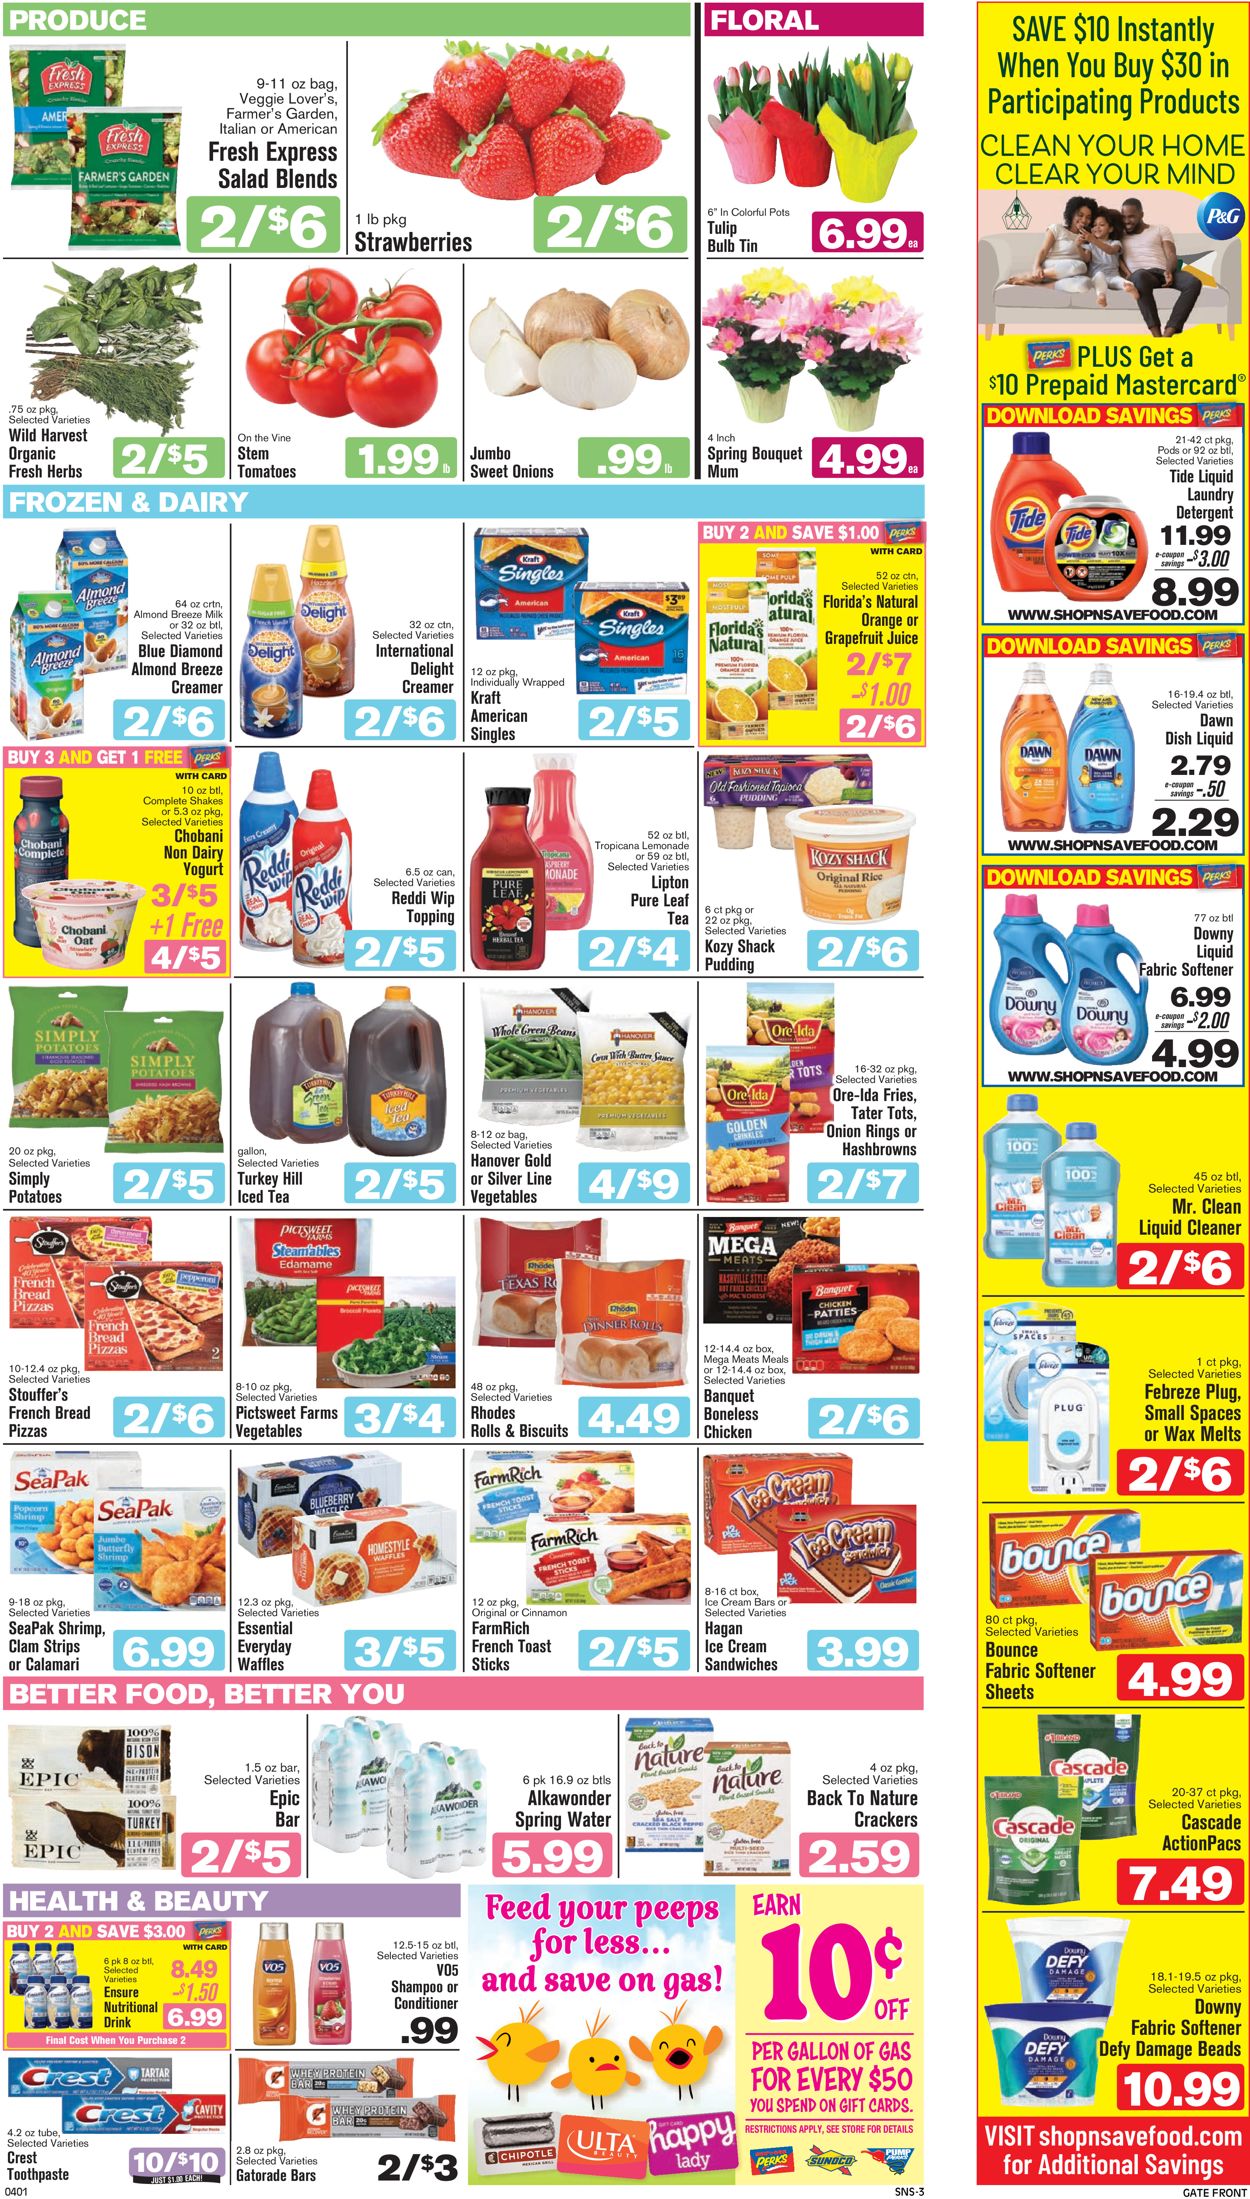 Catalogue Shop ‘n Save (Pittsburgh) Easter 2021 ad from 04/01/2021